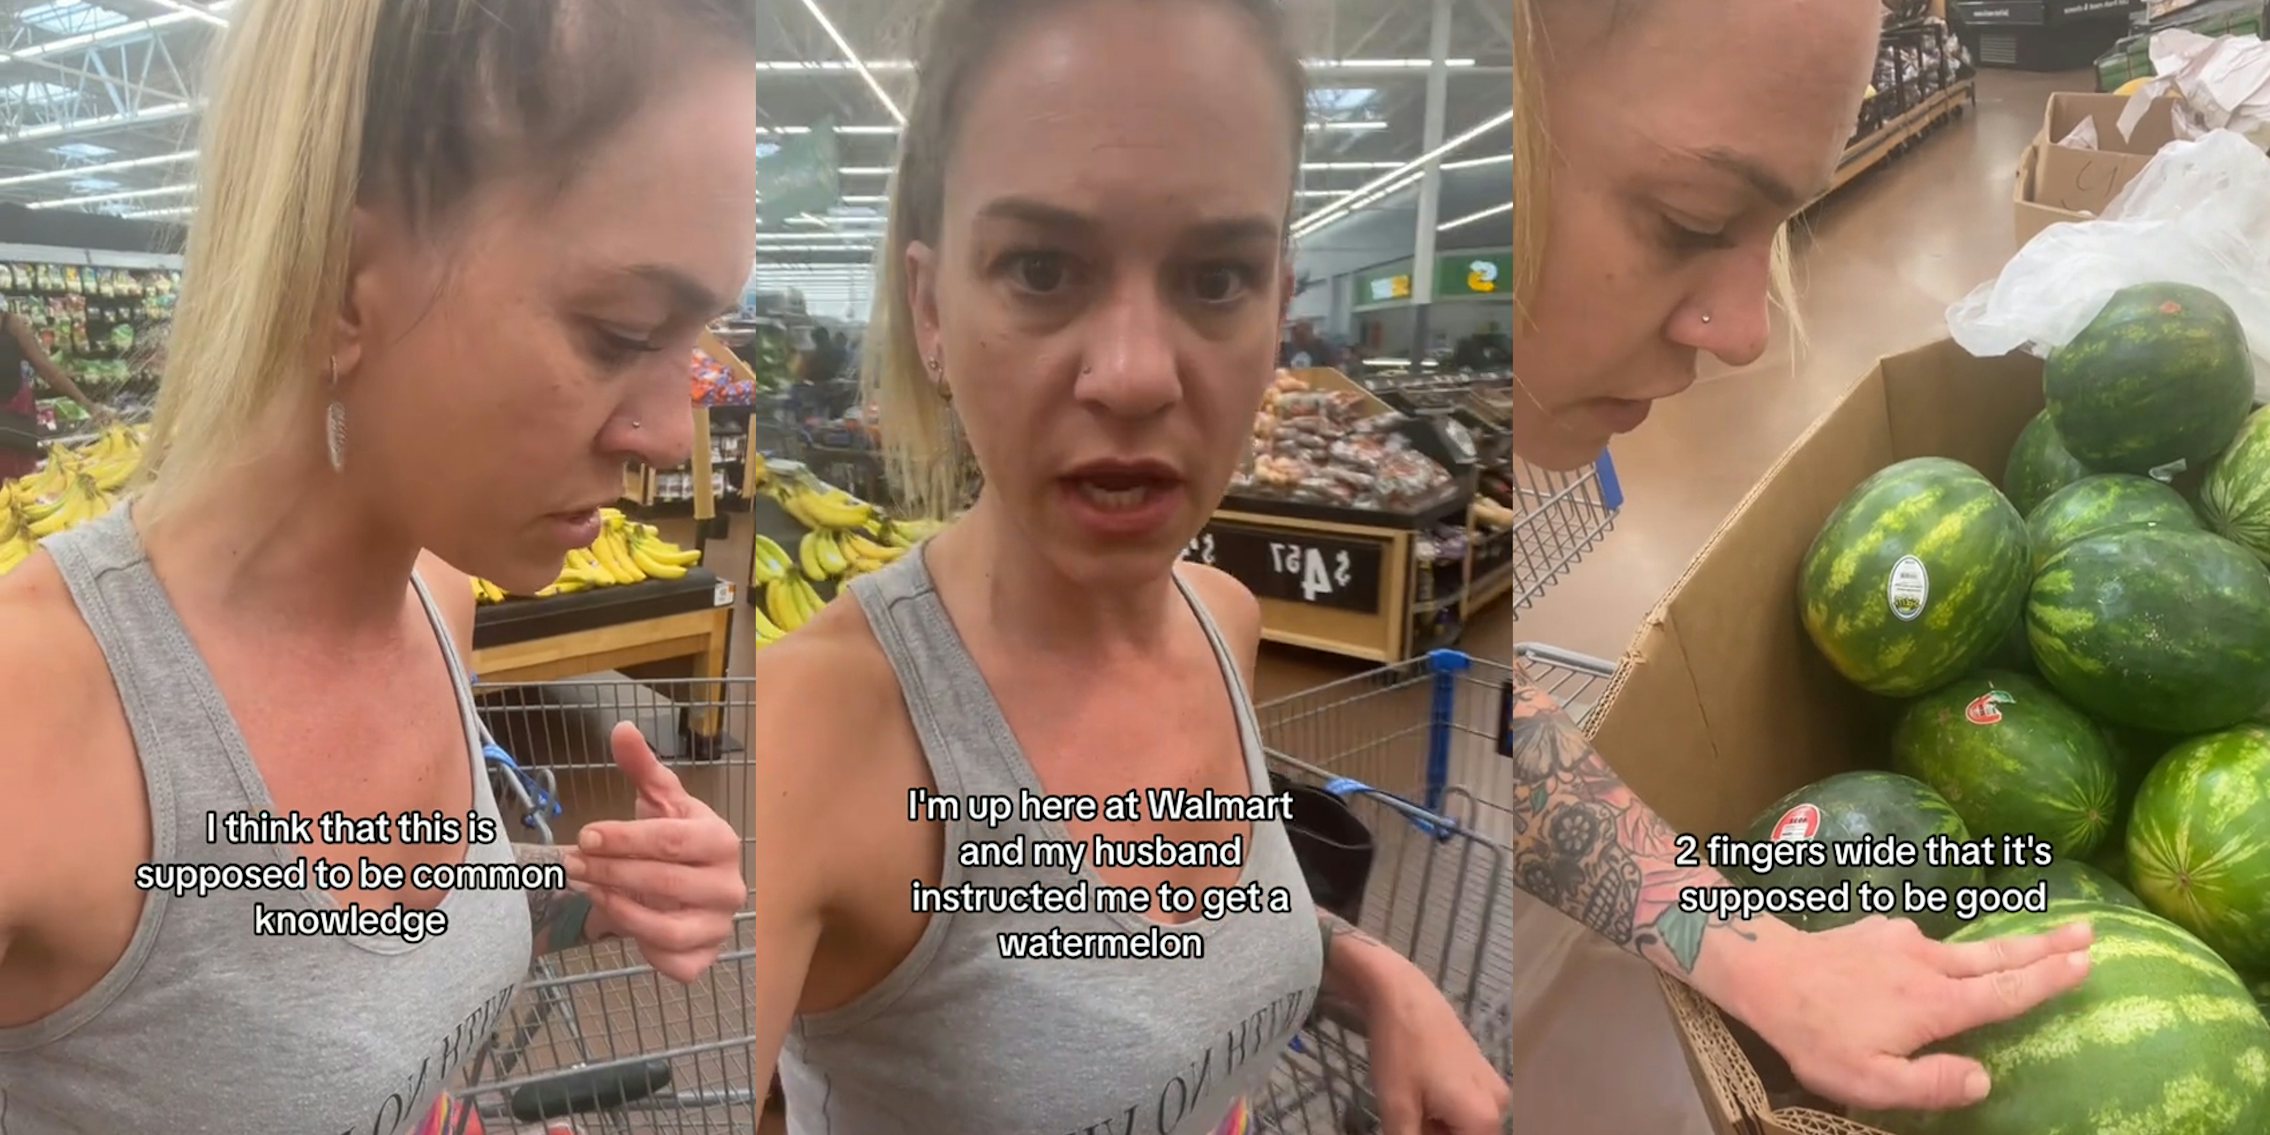 Walmart shopper speaking in fruit section with caption 'I think this is supposed to be common knowledge' (l) Walmart shopper speaking in fruit section with caption 'I'm up here at Walmart and my husband instructed me to get a watermelon' (c) Walmart shopper speaking in fruit section with caption '2 fingers wide that it's supposed to be good' (r)